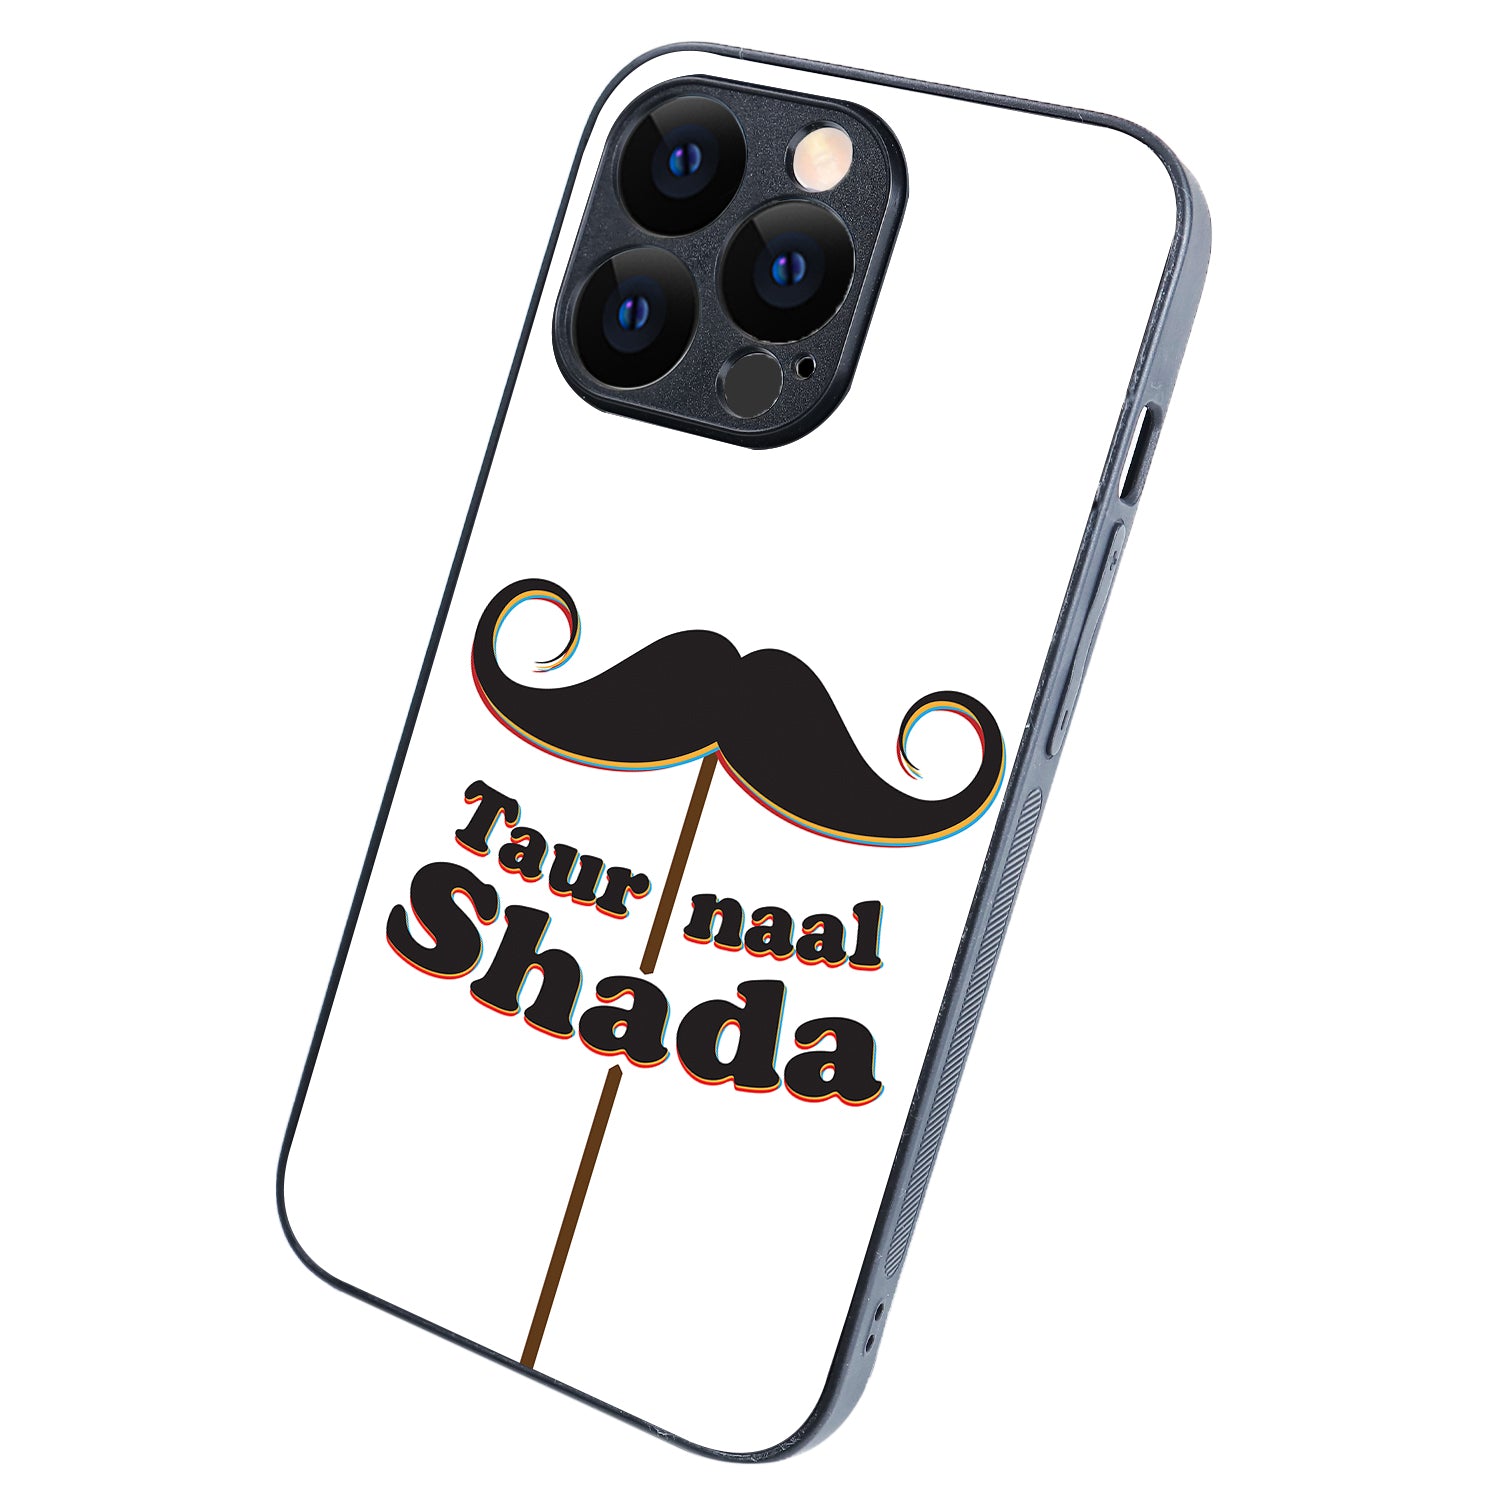 Taur Naal Shada Motivational Quotes iPhone 13 Pro Case